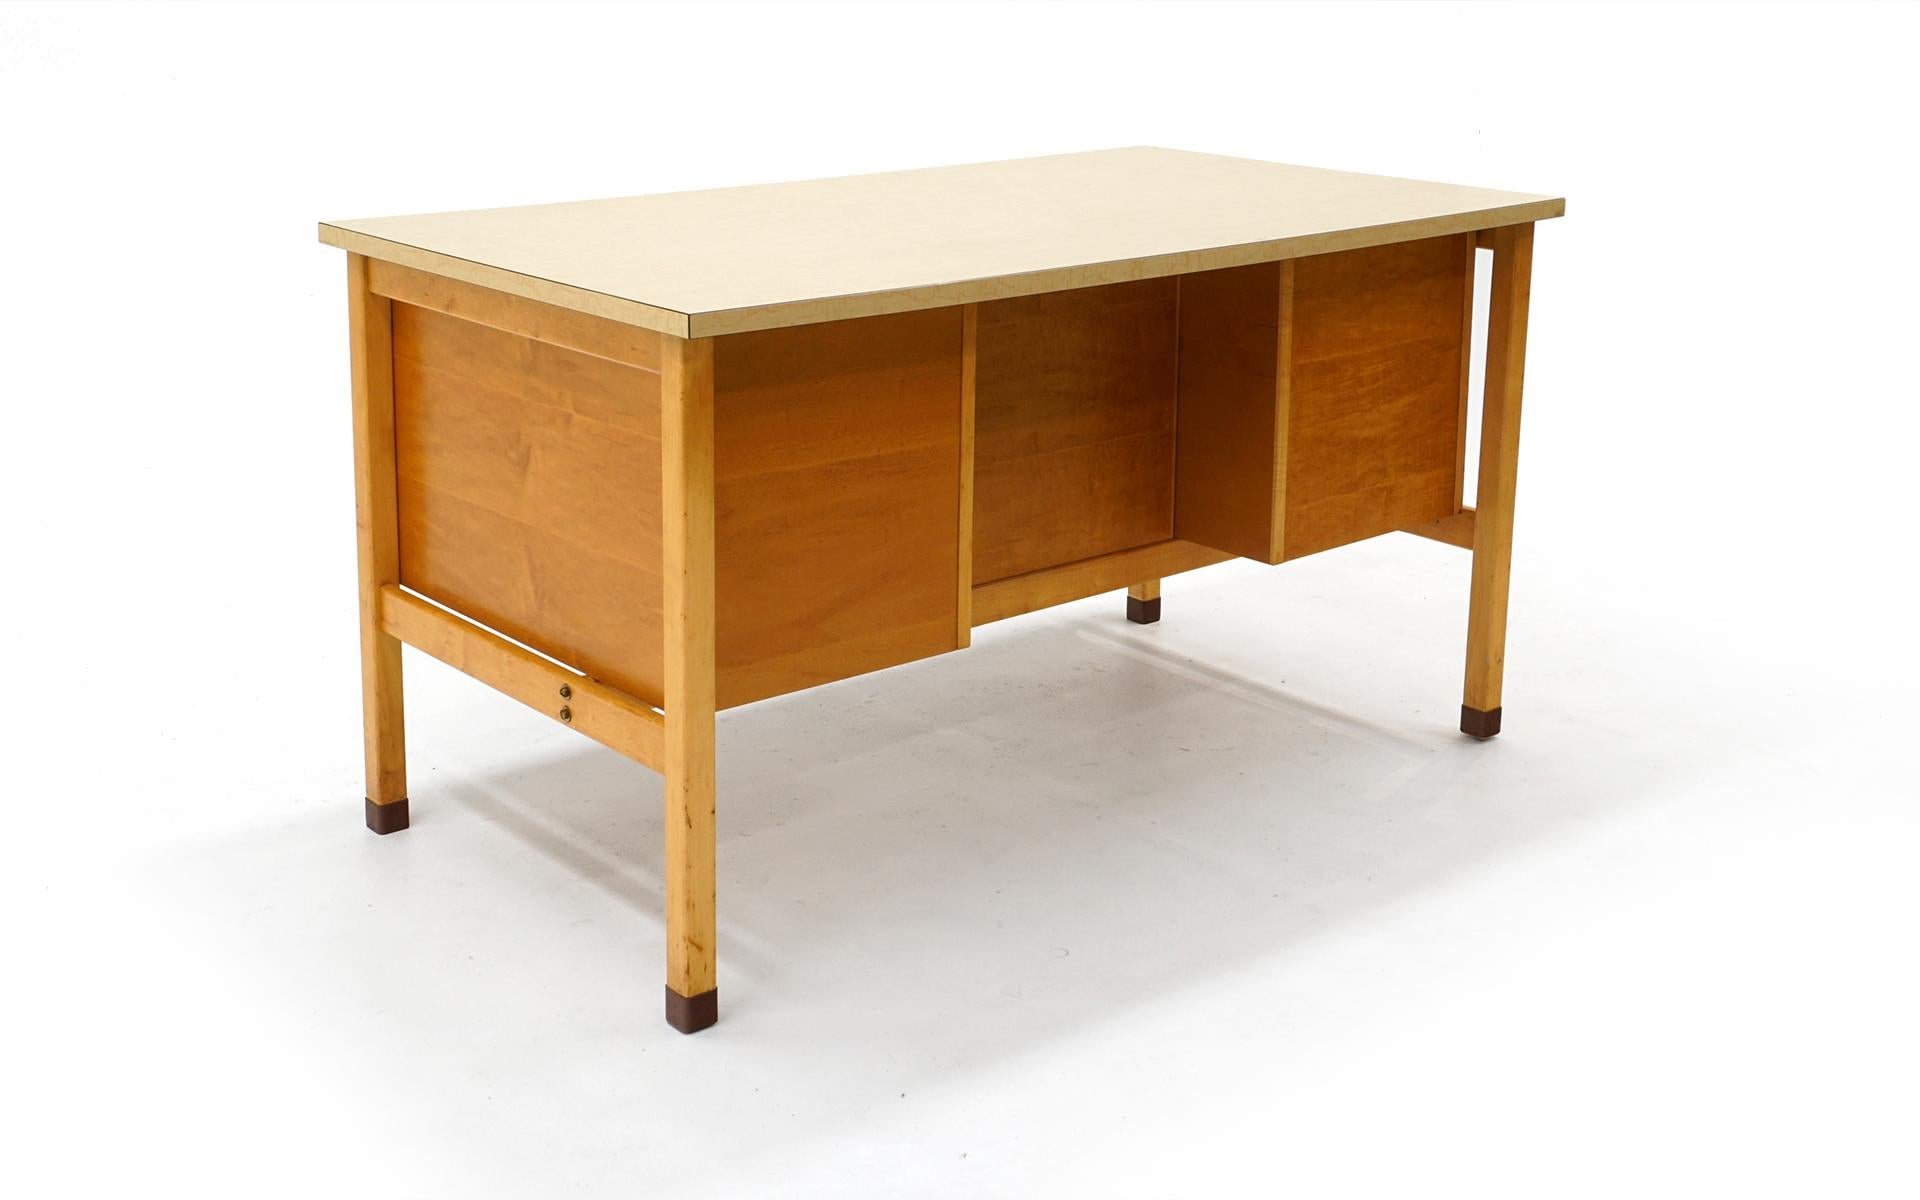 Desk by Jens Risom, Blonde Wood, Blue Drawer Fronts, Chrome Pulls, Laminate Top In Good Condition For Sale In Kansas City, MO